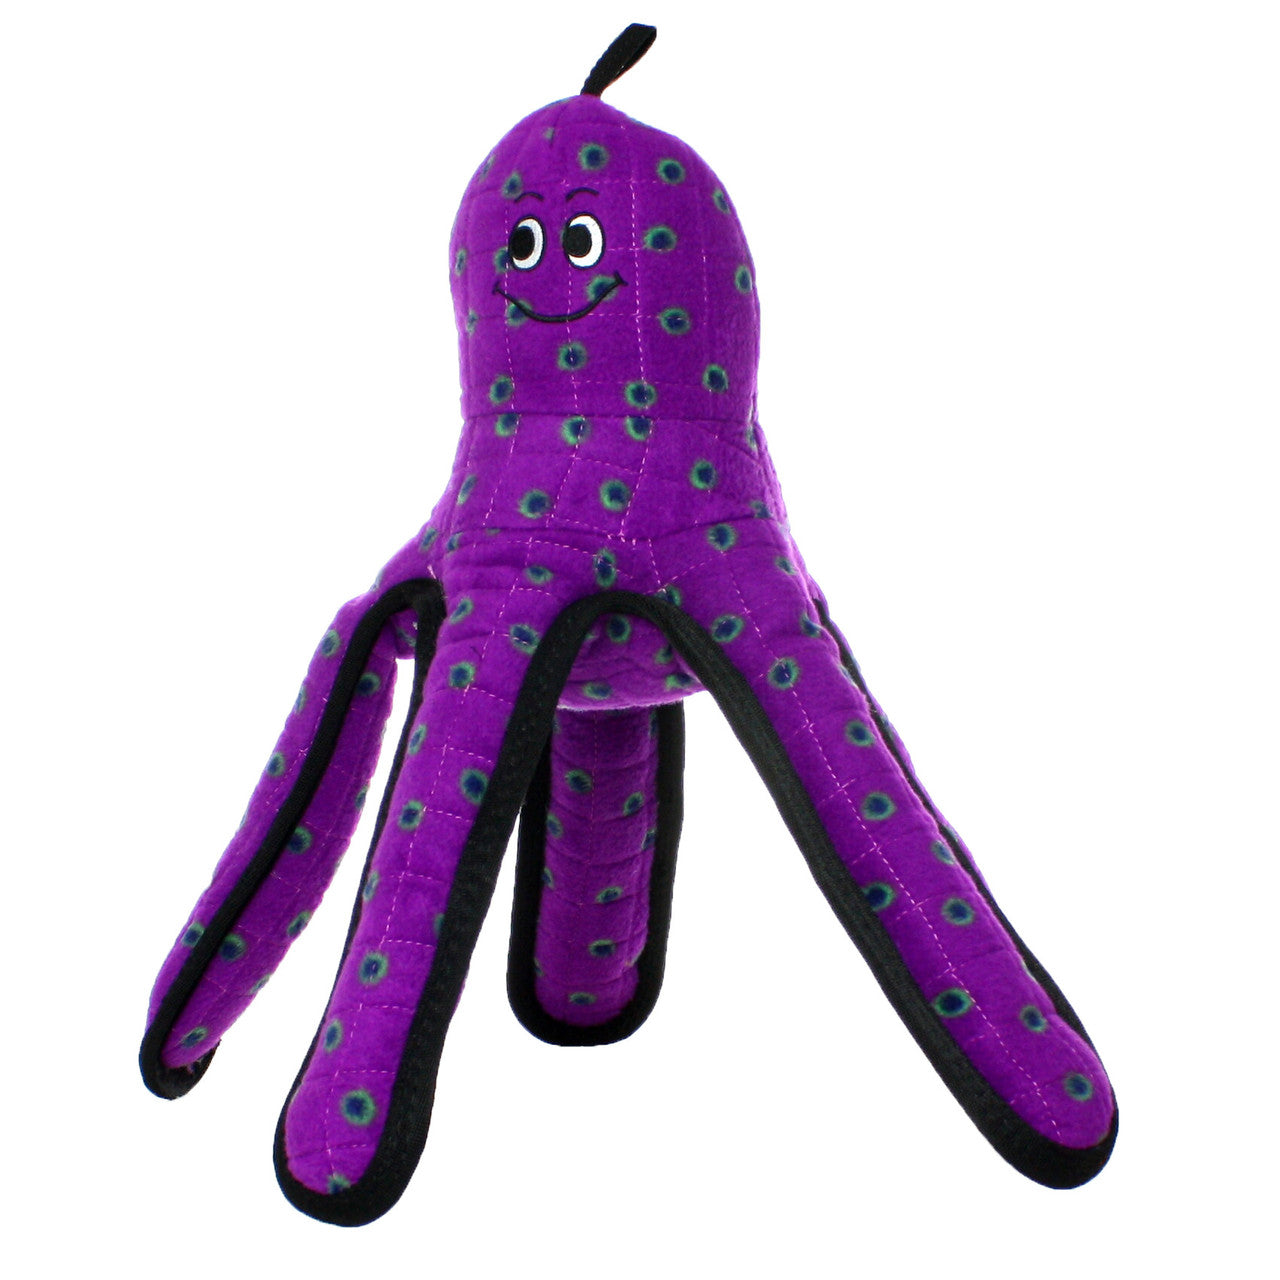 Tuffy Ocean Creature Octopus Durable Dog Toy Purple 15.8in LG